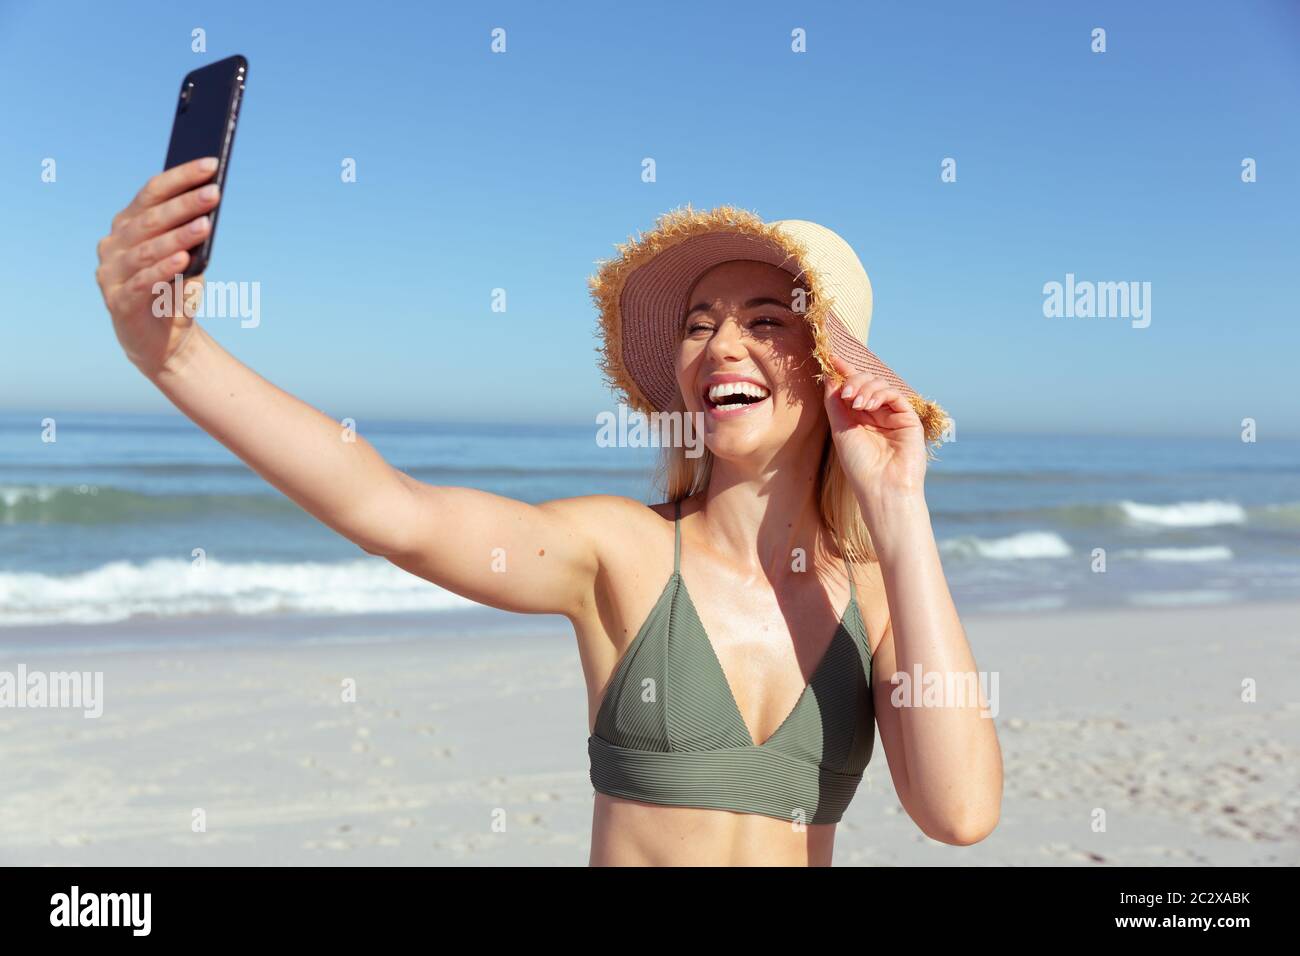 Caucasian woman using a phone and taking selfie at beach Stock Photo